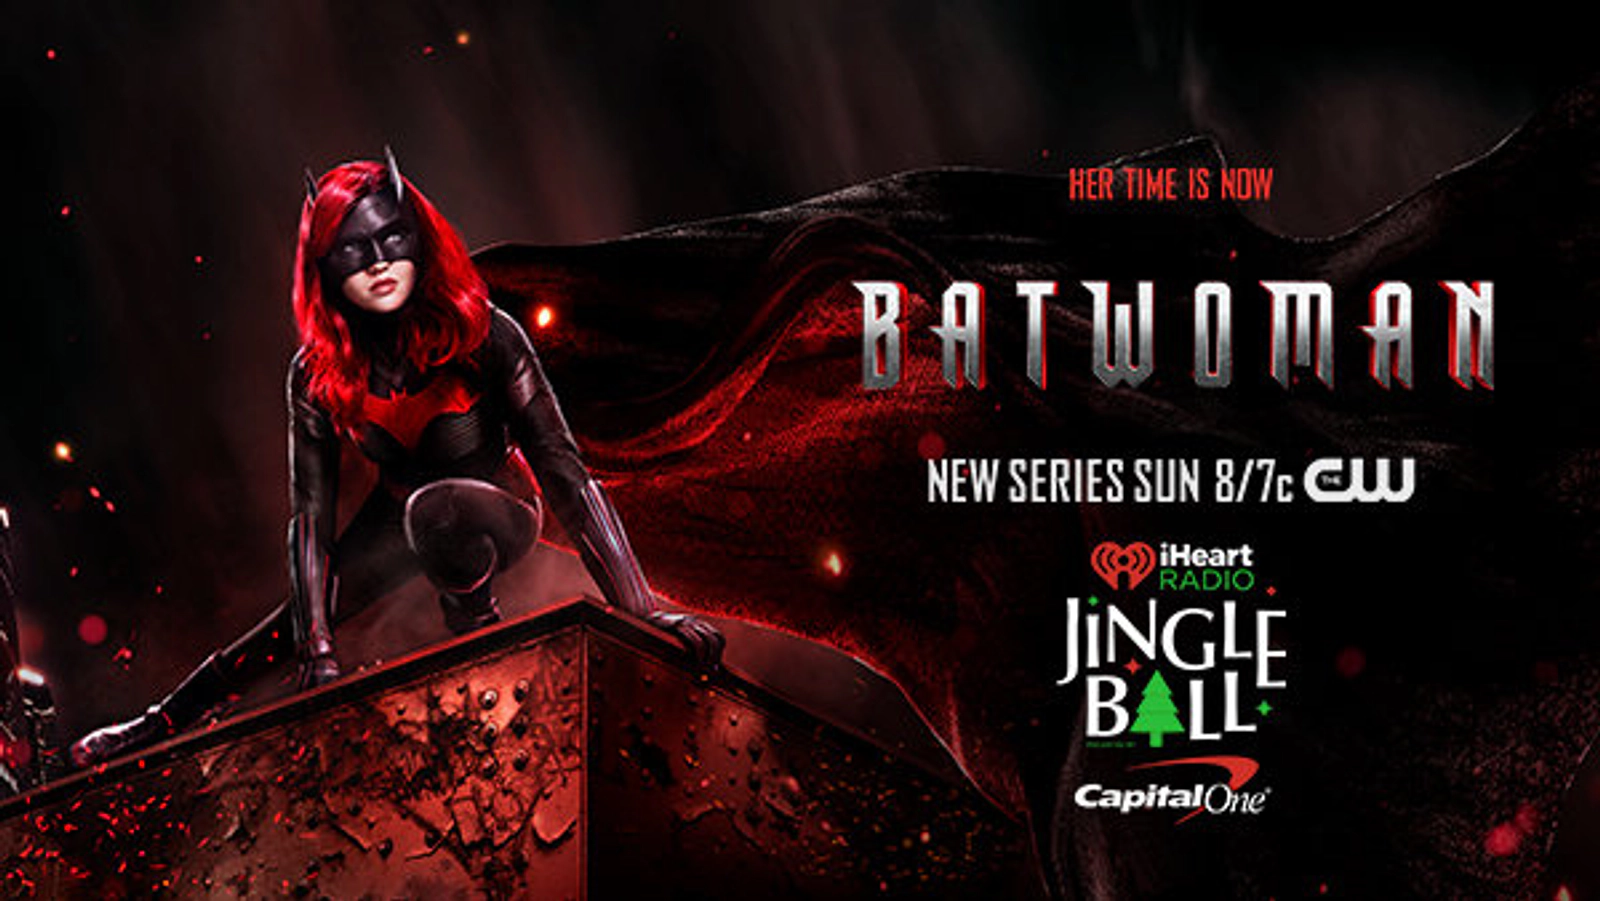 The CW Wants To Send You To iHeartRadio's Jingle Ball In NYC! - Thumbnail Image